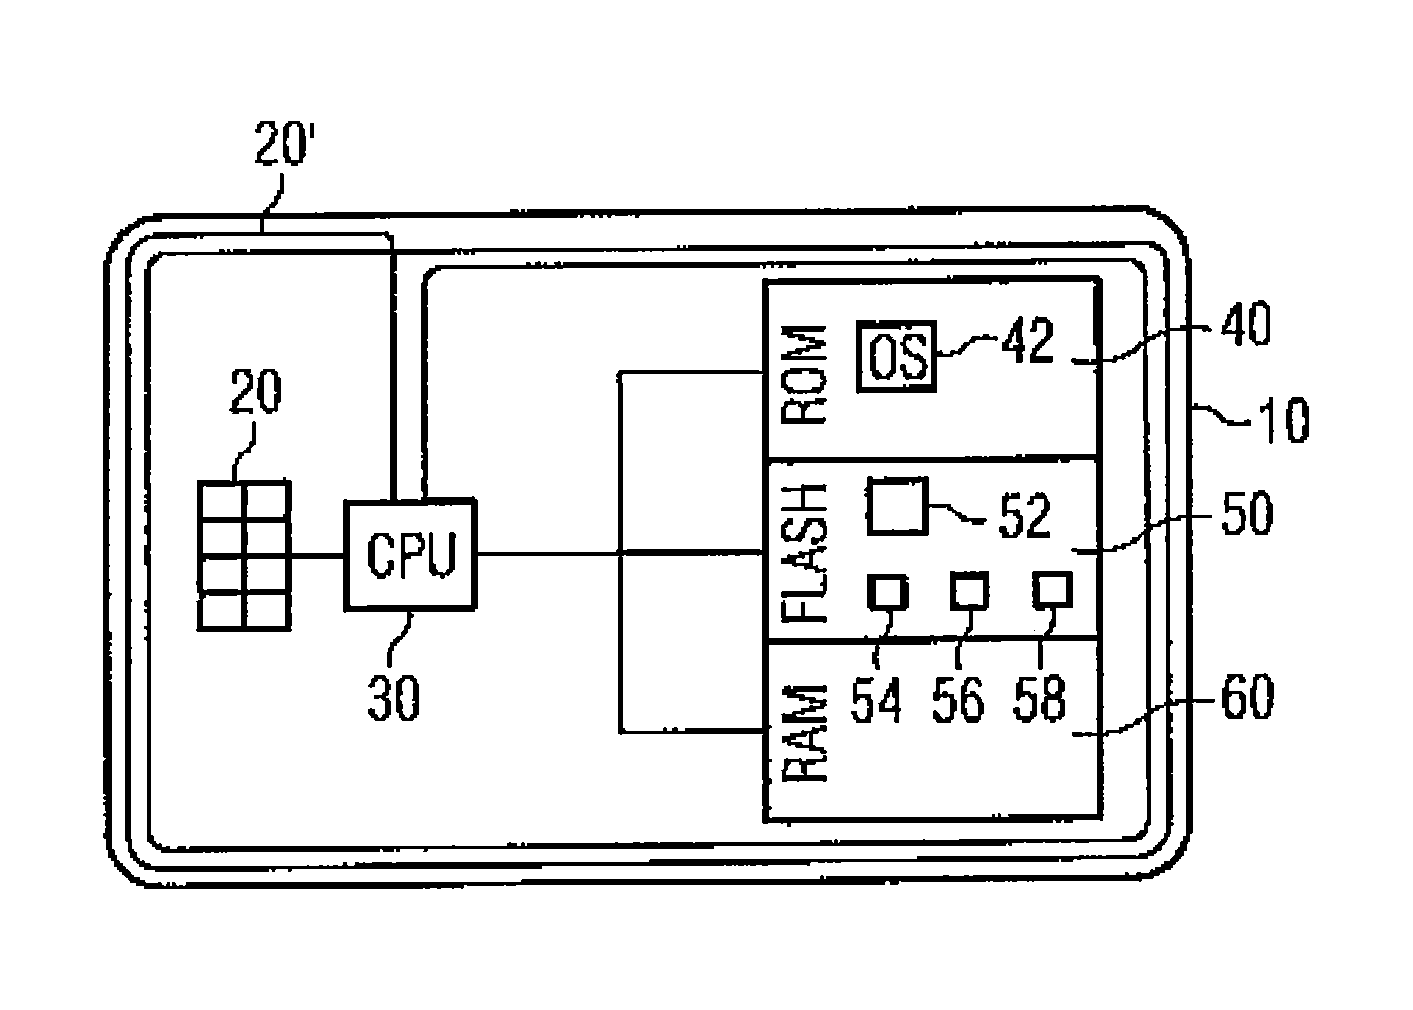 Method for authenticating a portable data carrier